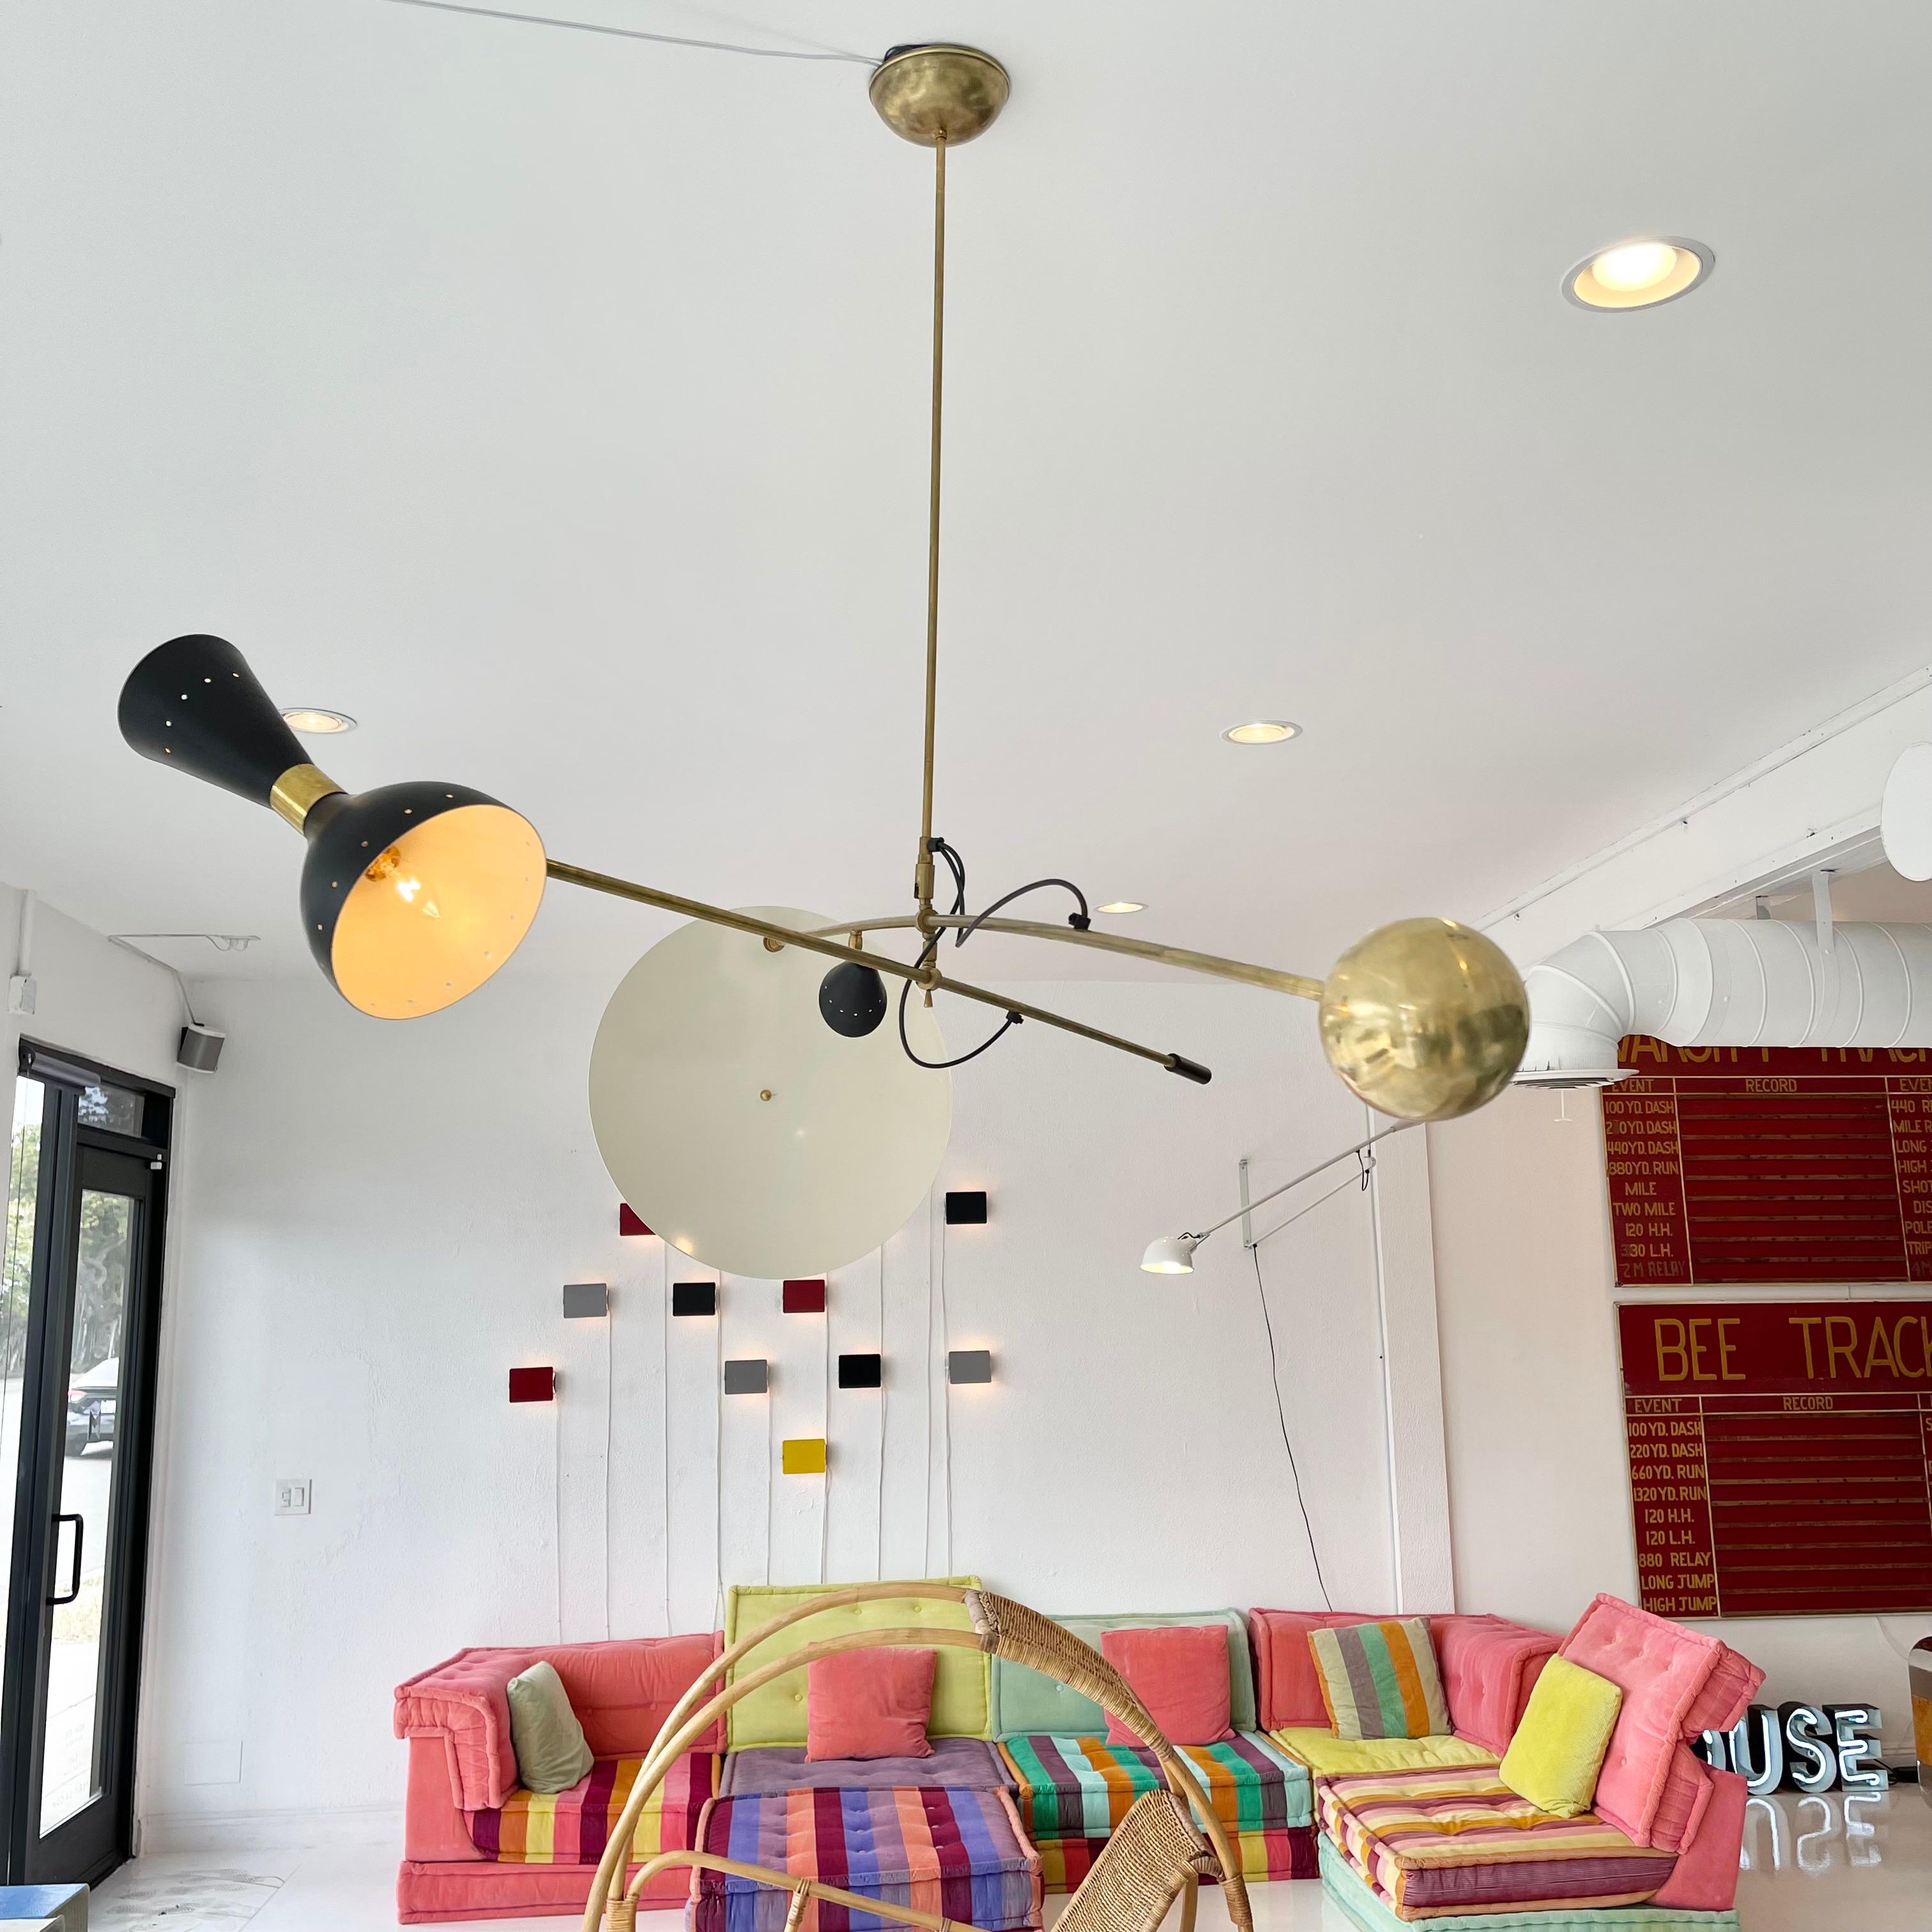 Large architectural chandelier in the style of Stilnovo. Chandelier has two large brass arms that can swing in multiple directions. One arm features a large brass ball counterweight on one end, and on the other, a perforated metal cone which shines